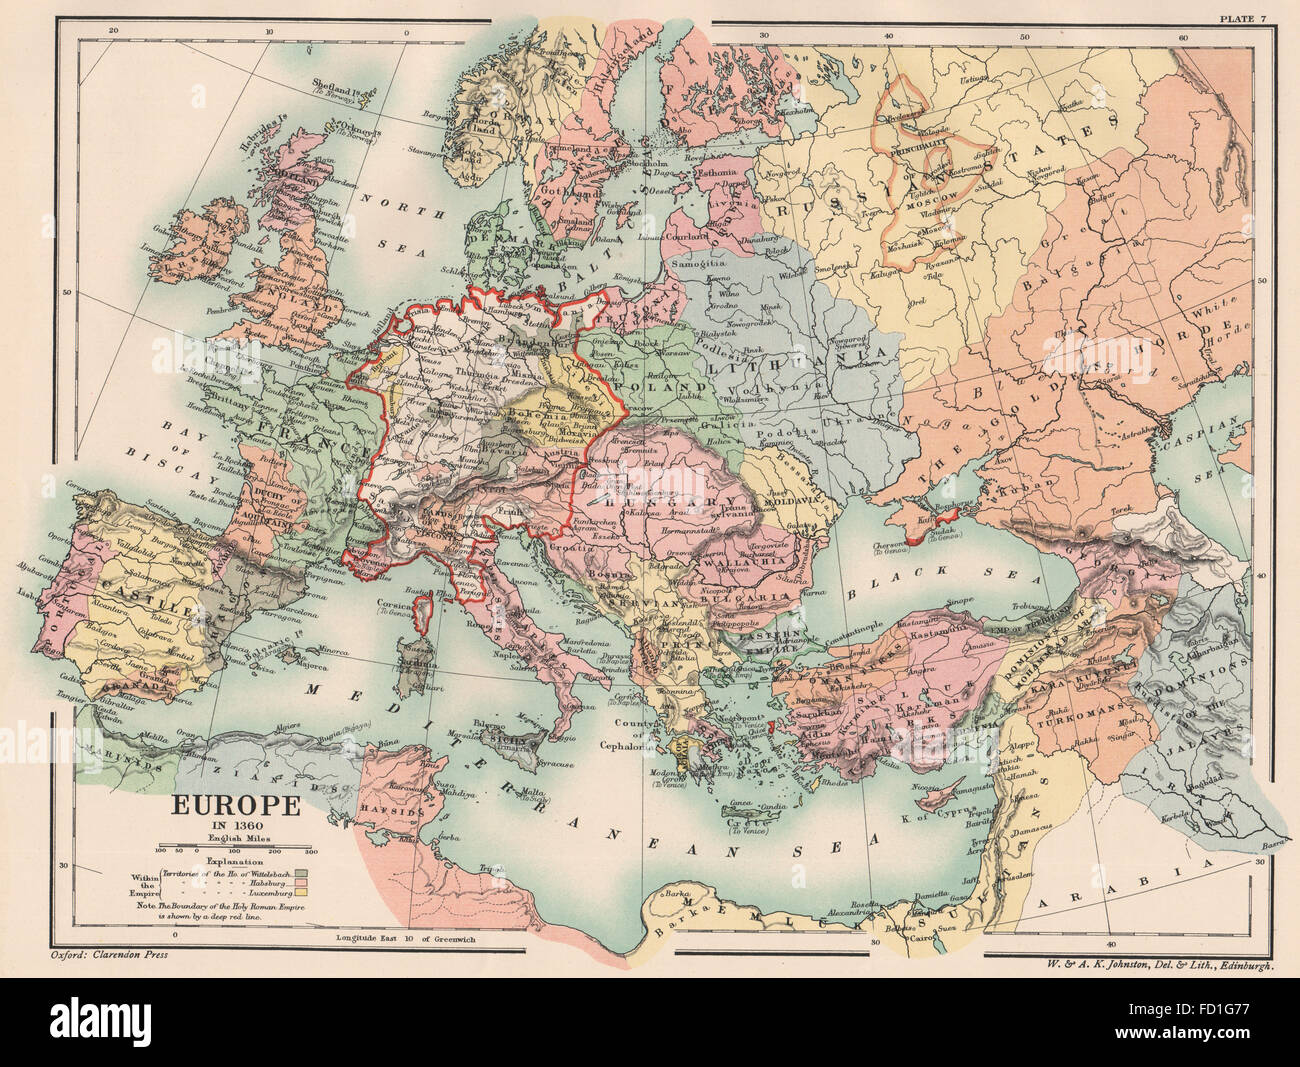 HOLY ROMAN EMPIRE: Europe in 1360, 1902 antique map Stock Photo